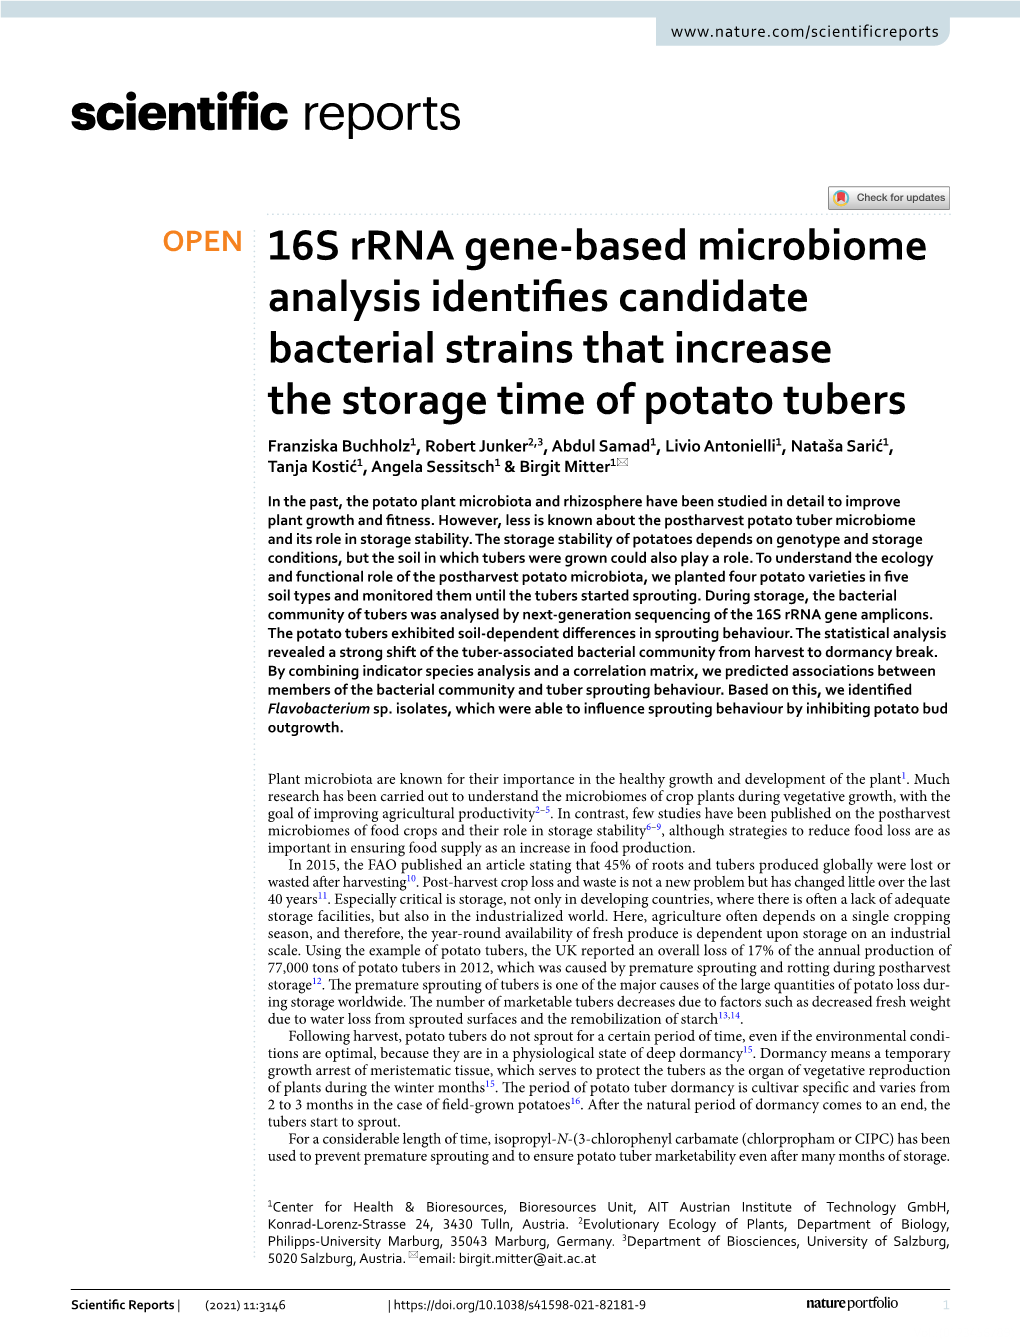 16S Rrna Gene-Based Microbiome Analysis Identifies Candidate Bacterial Strains That Increase the Storage Time of Potato Tubers